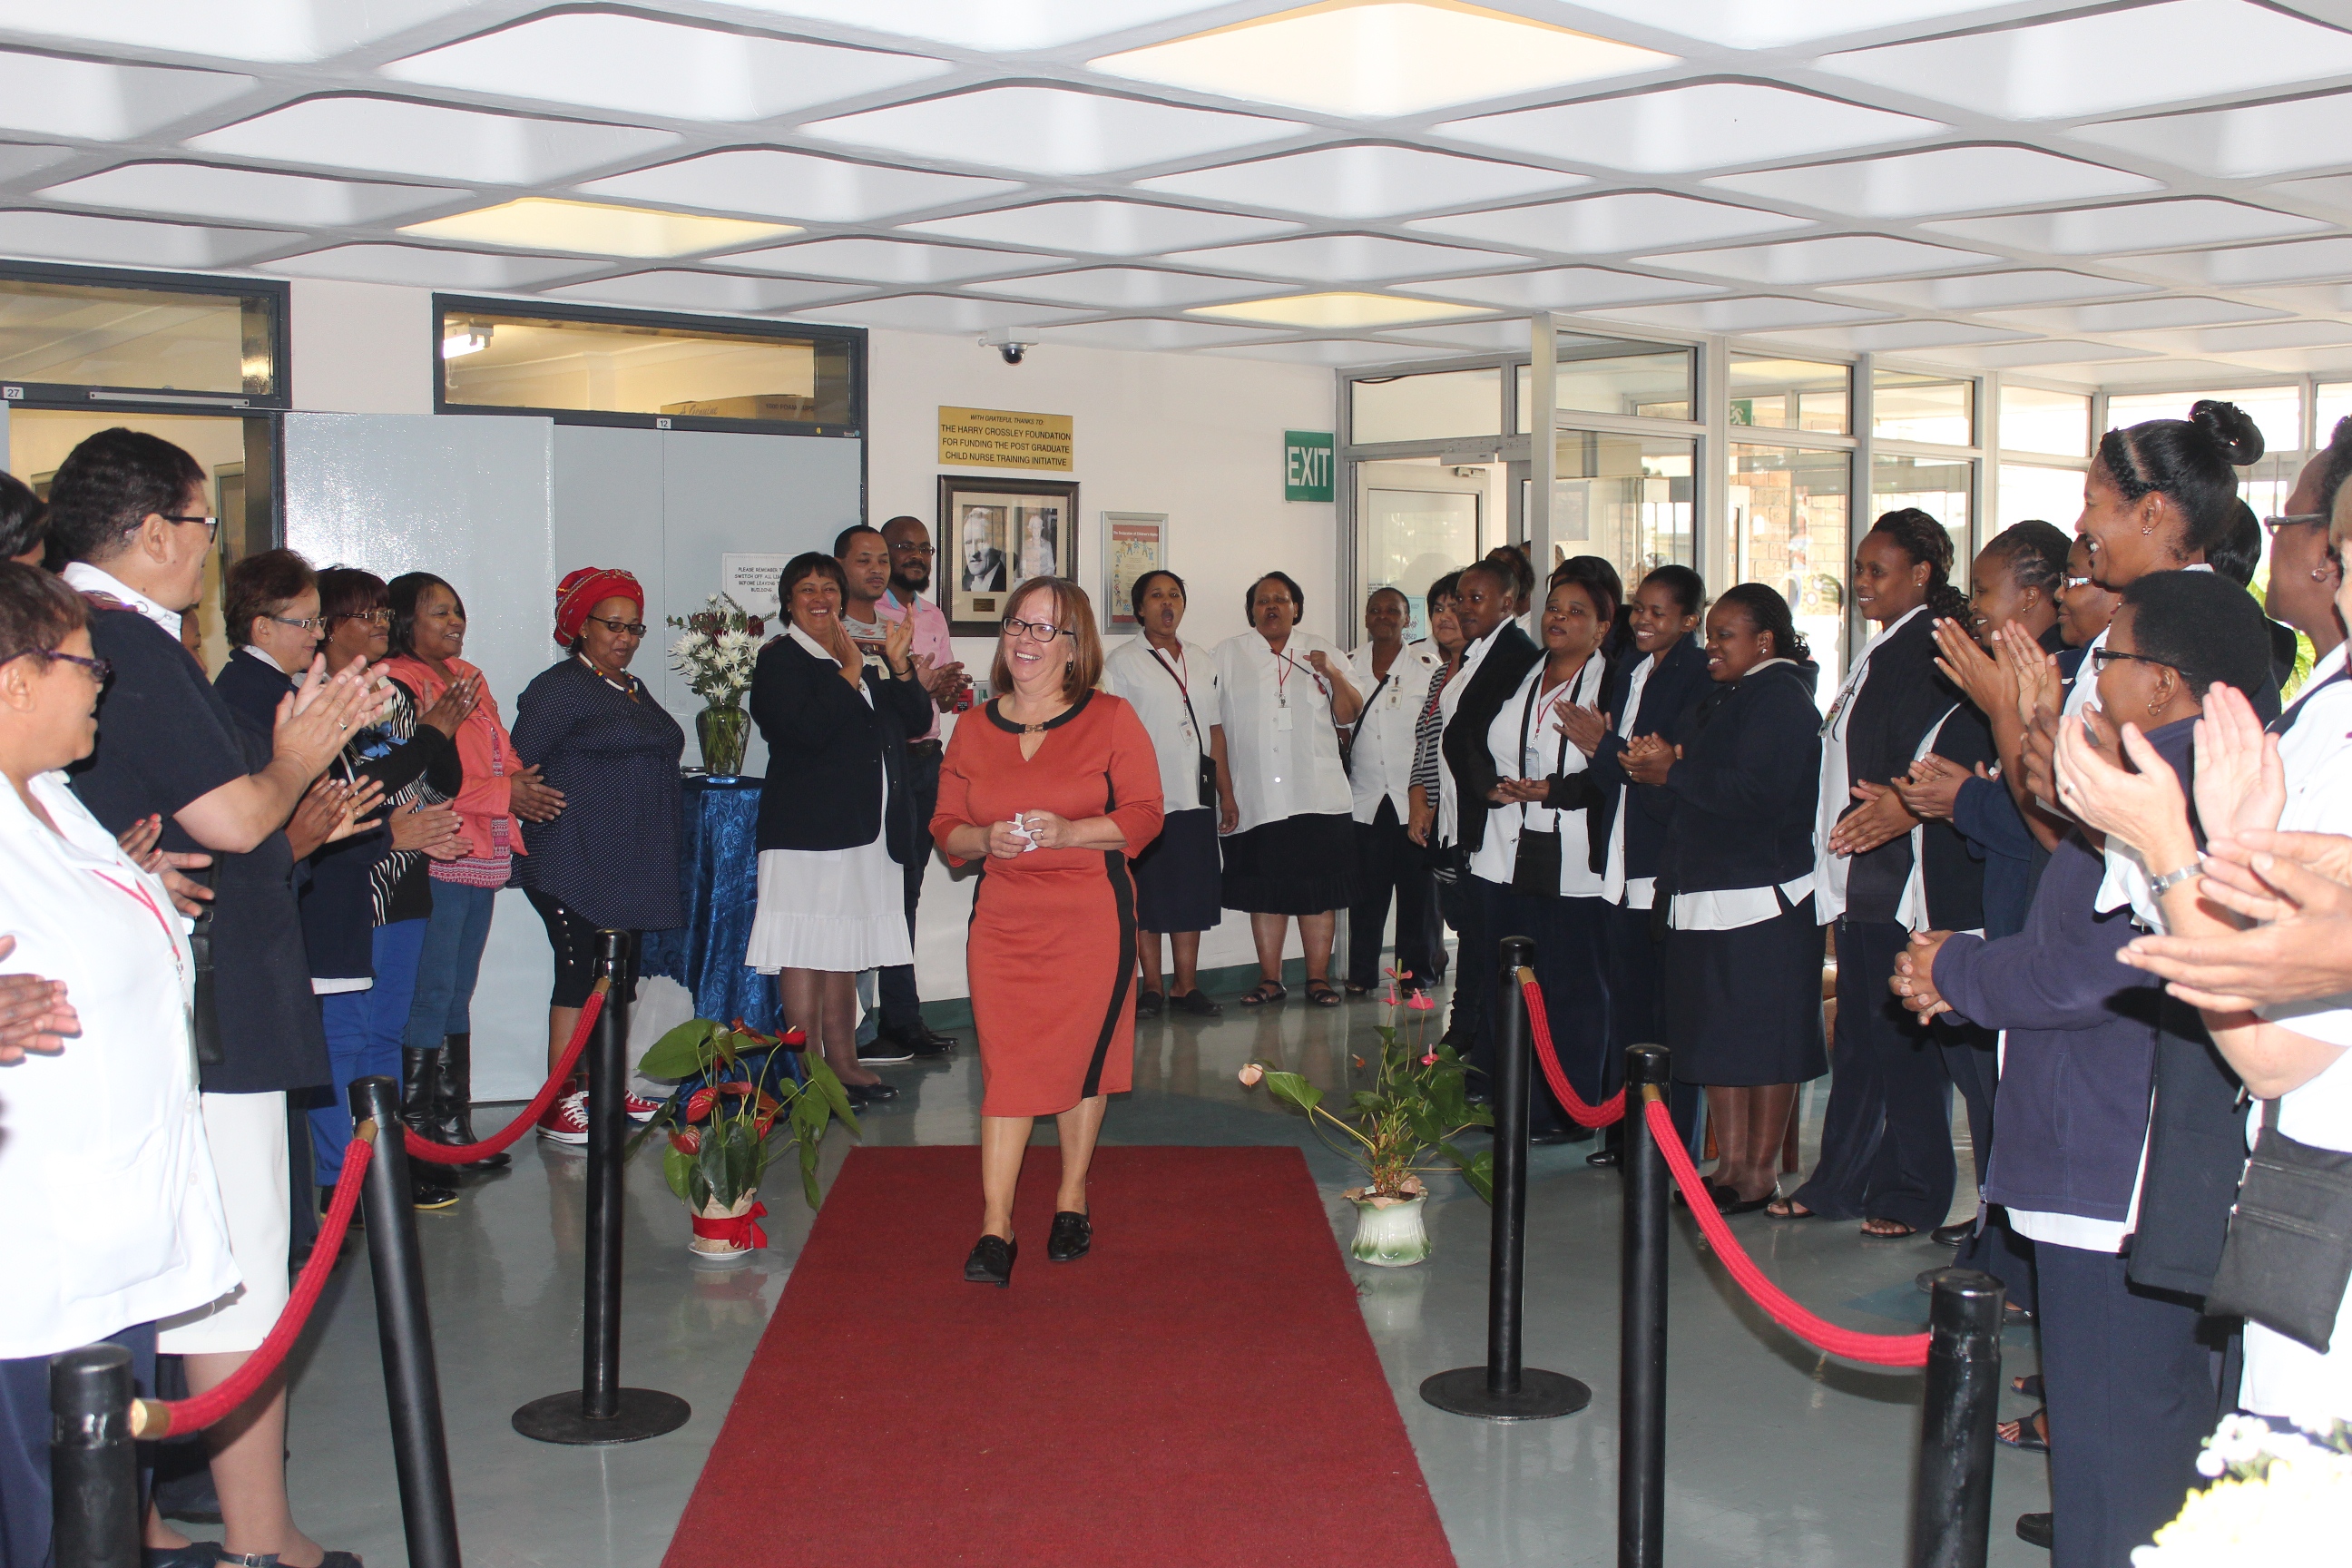 Sandra Roodt being welcomed by Nursing staff members at her farewell.